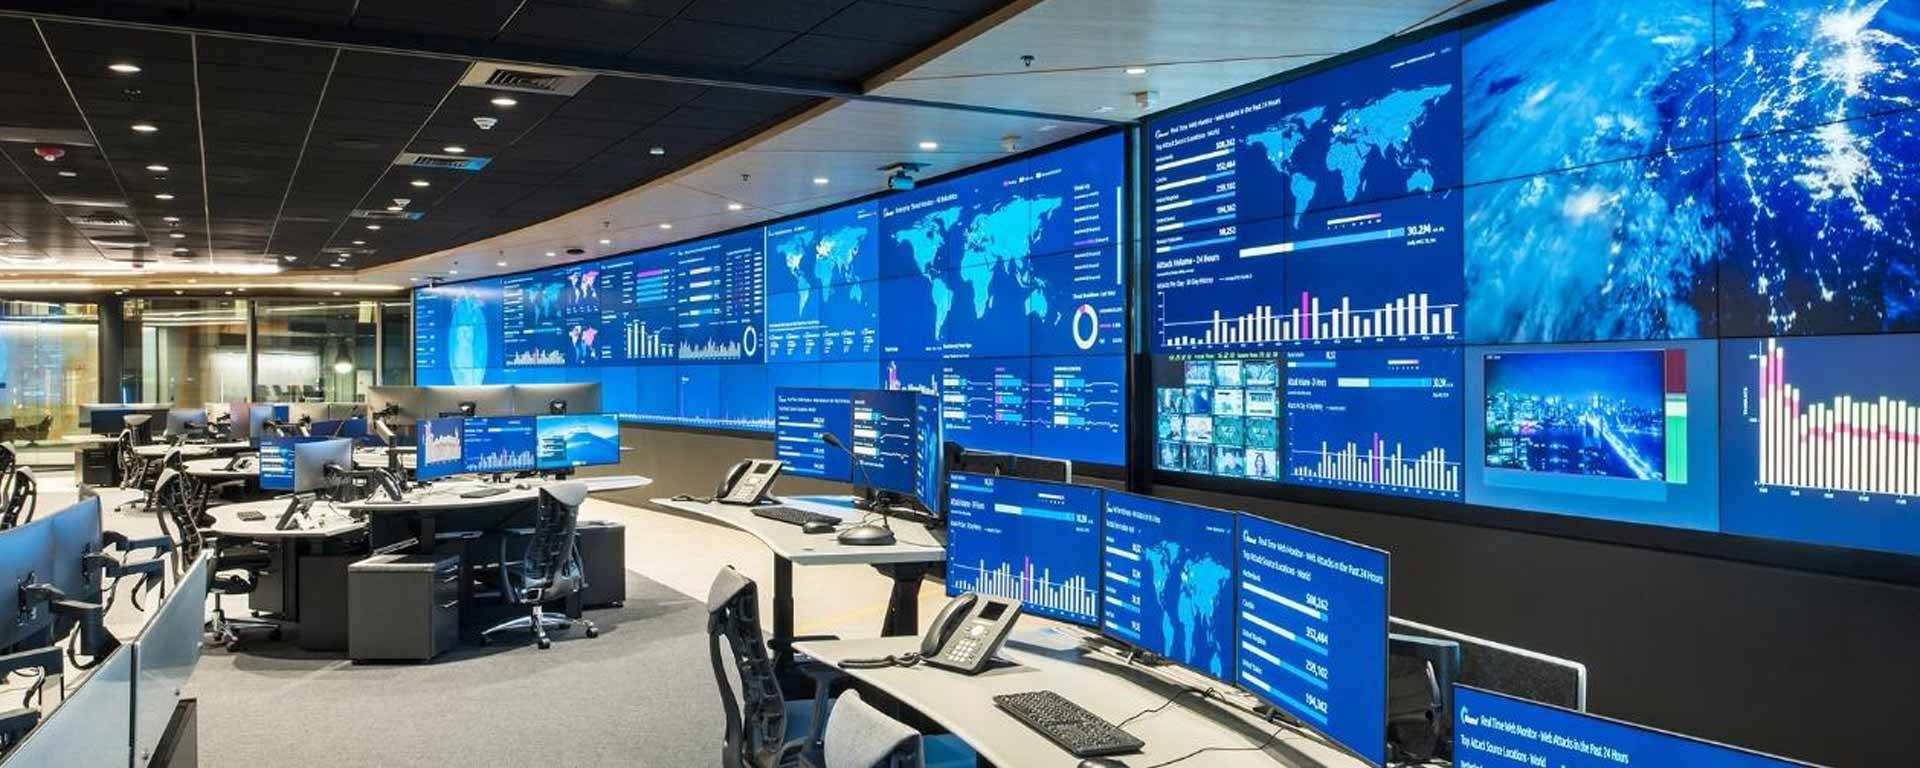 Network operations center video wall in kenya